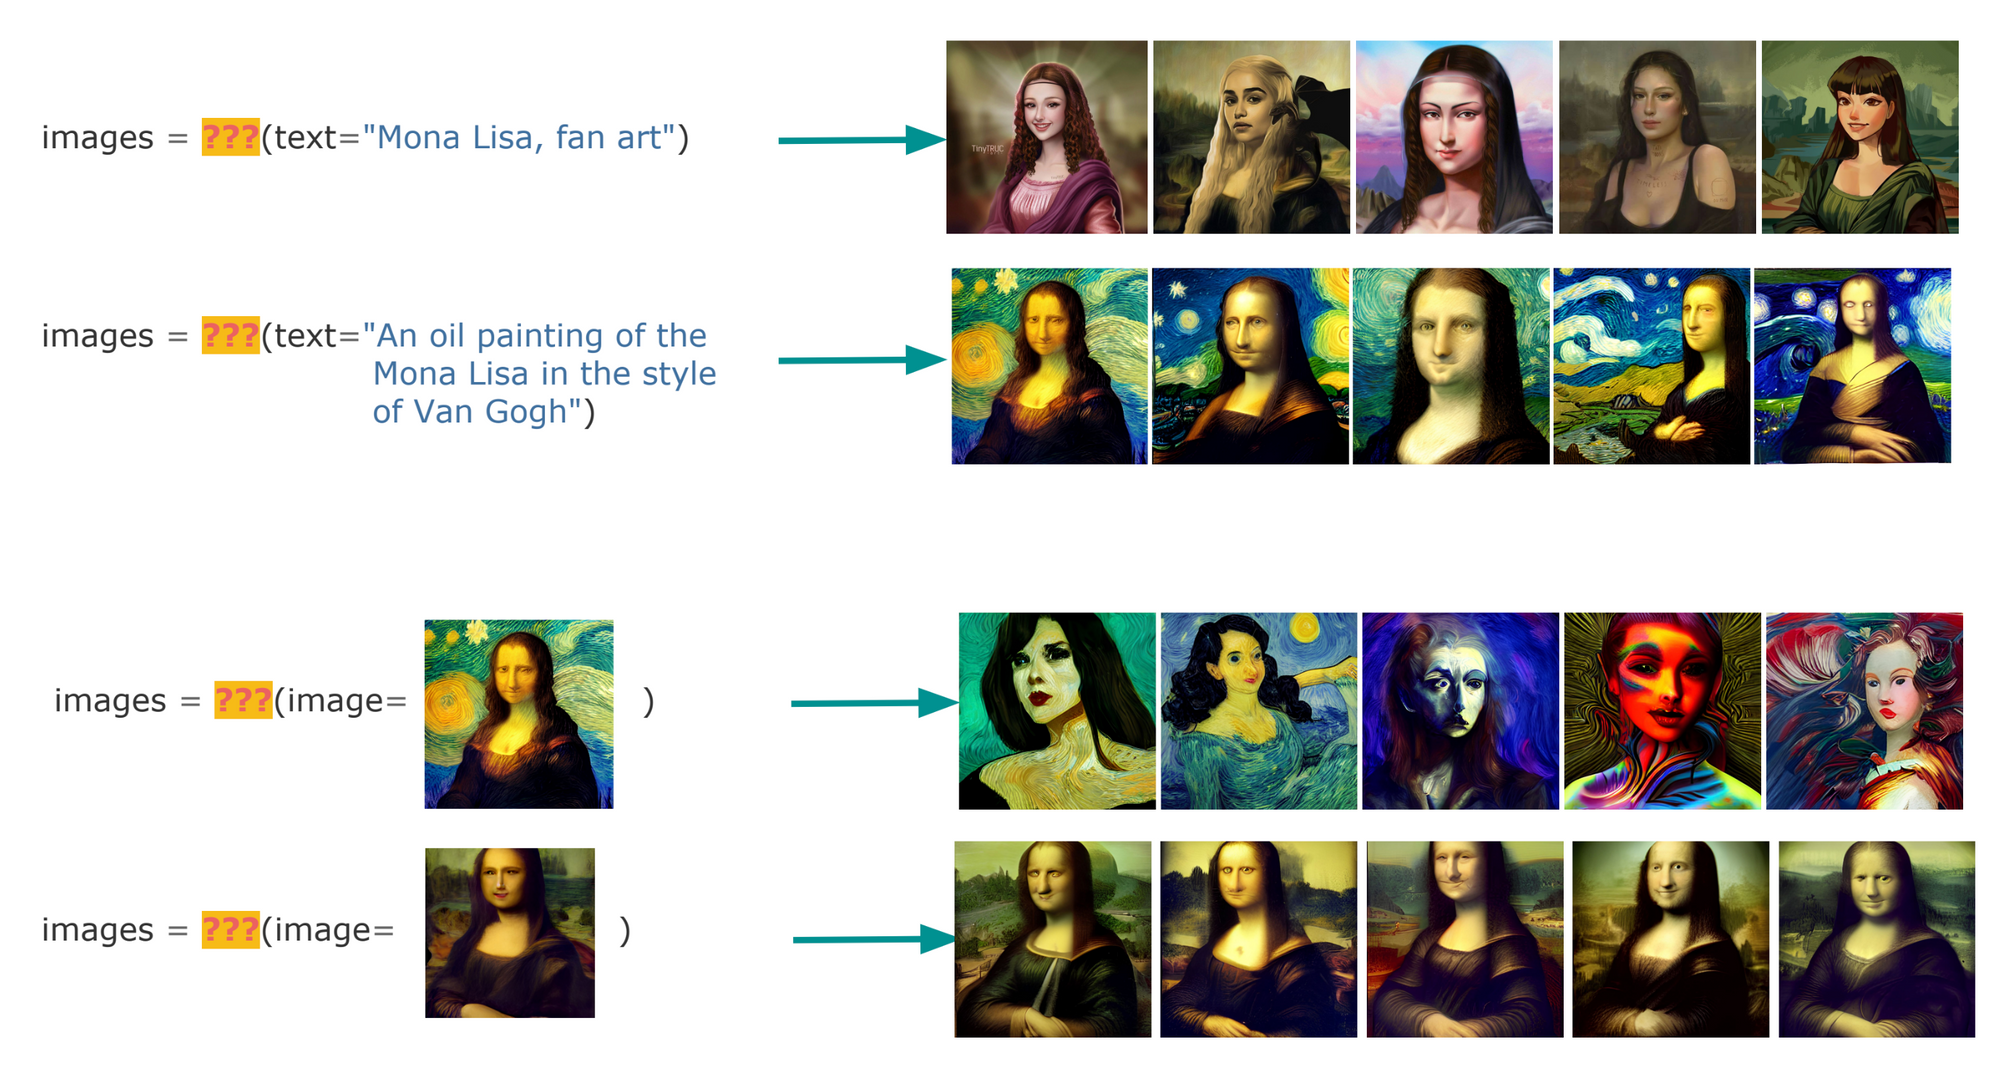 Series of six images depicting the transformation of the Mona Lisa into Van Gogh's style, possibly an art style transfer demo